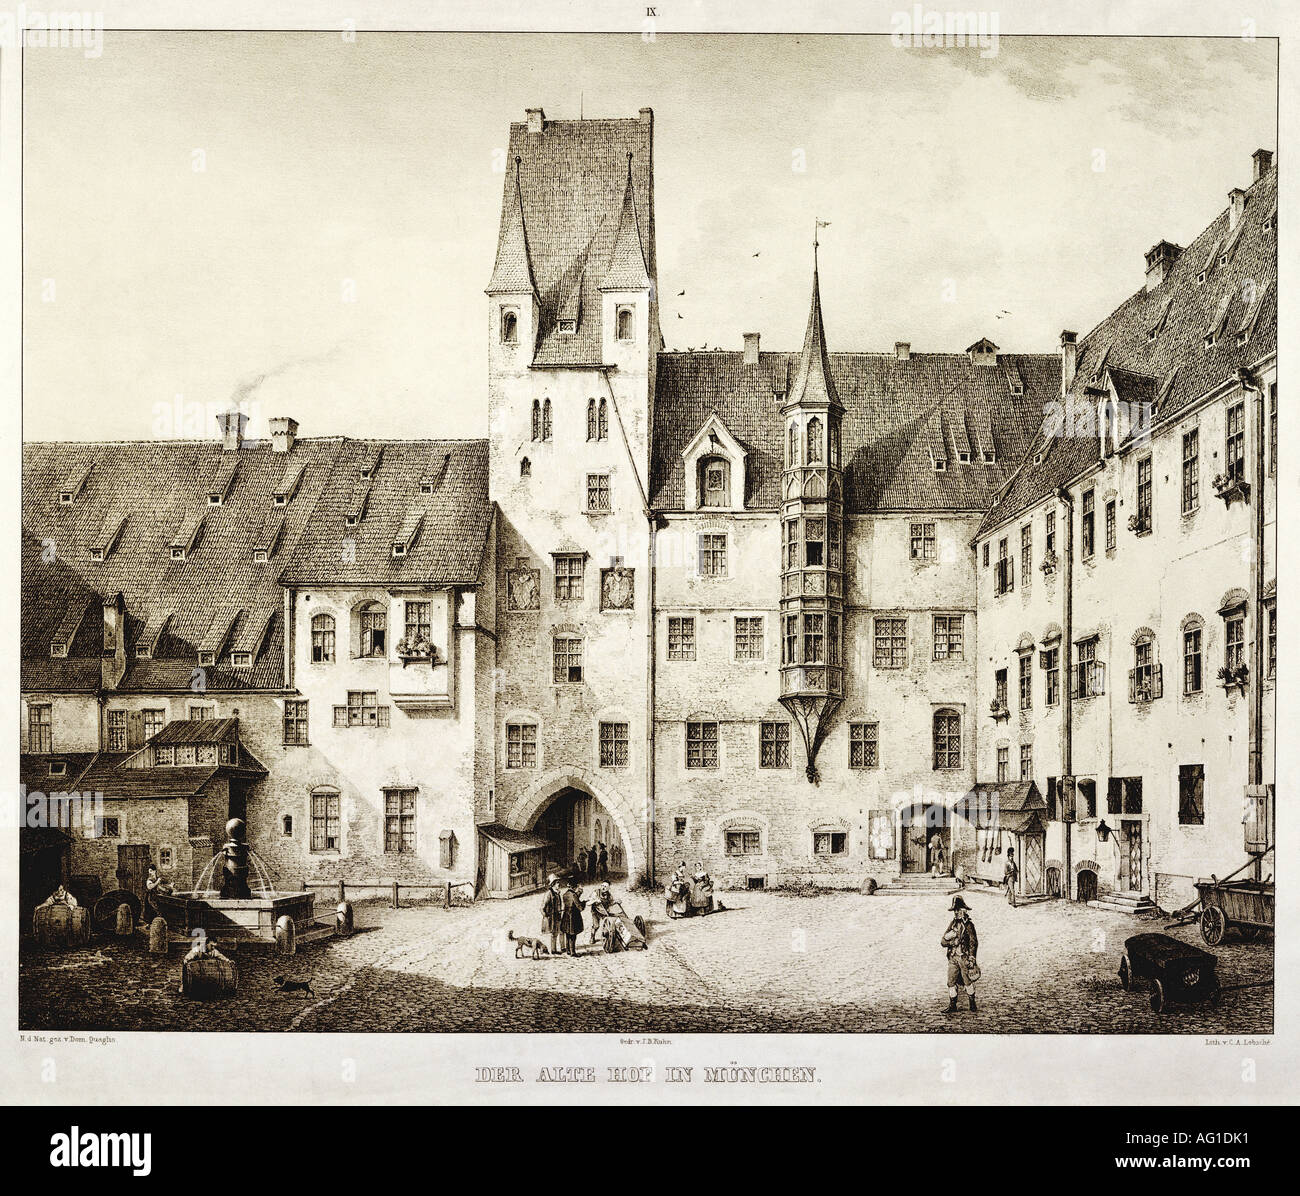 geography/travel, Germany, Munich, buildings, Alter Hof, exterior view, engraving by Carl August Lebschée (1800 - 1877), after a drawing by Domenico Quaglio (1787 - 1837), circa 1830, Stock Photo